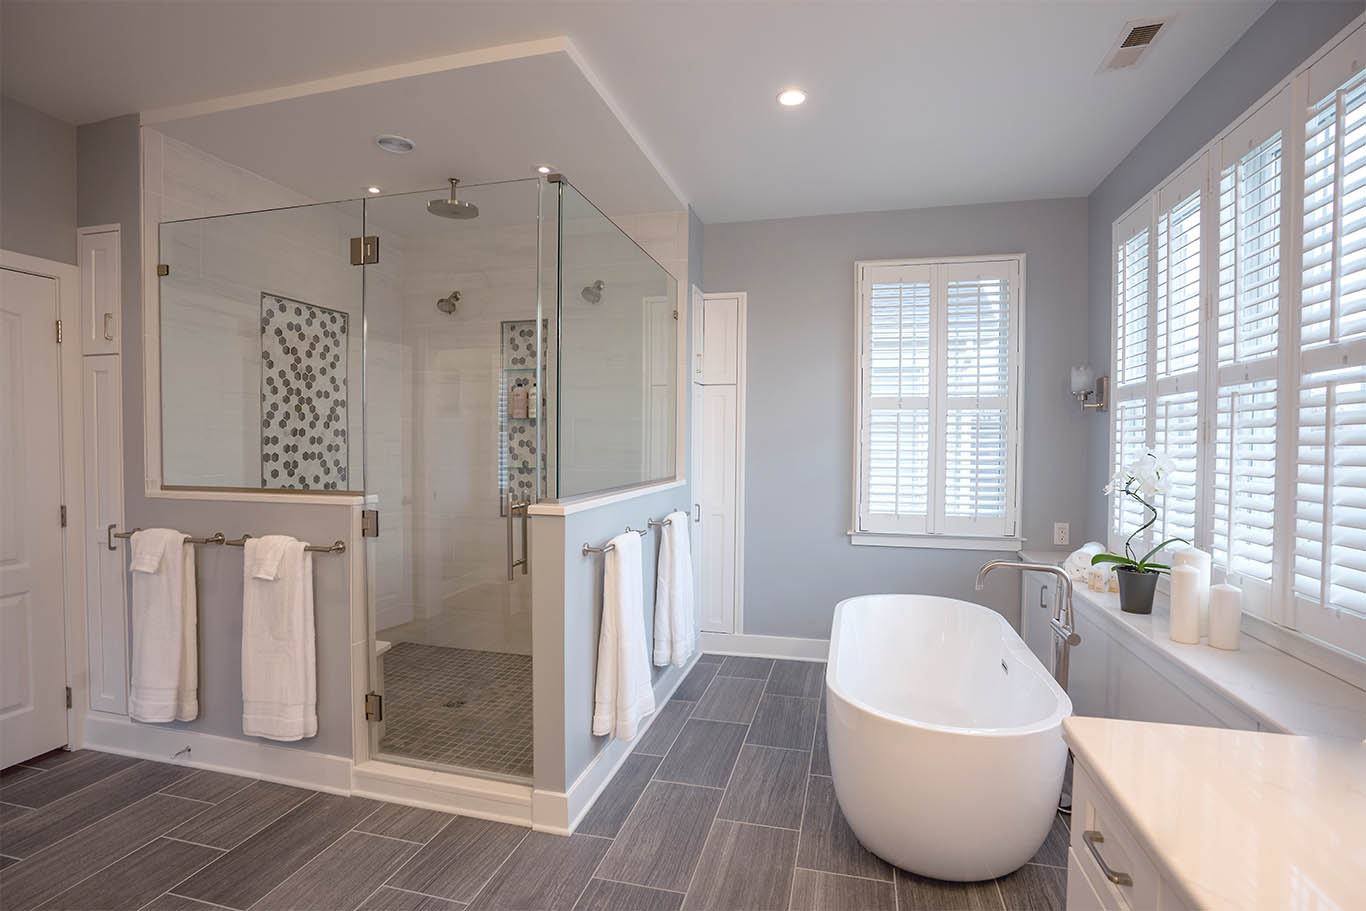 Create an At-Home Spa with these Bathroom Remodel Ideas